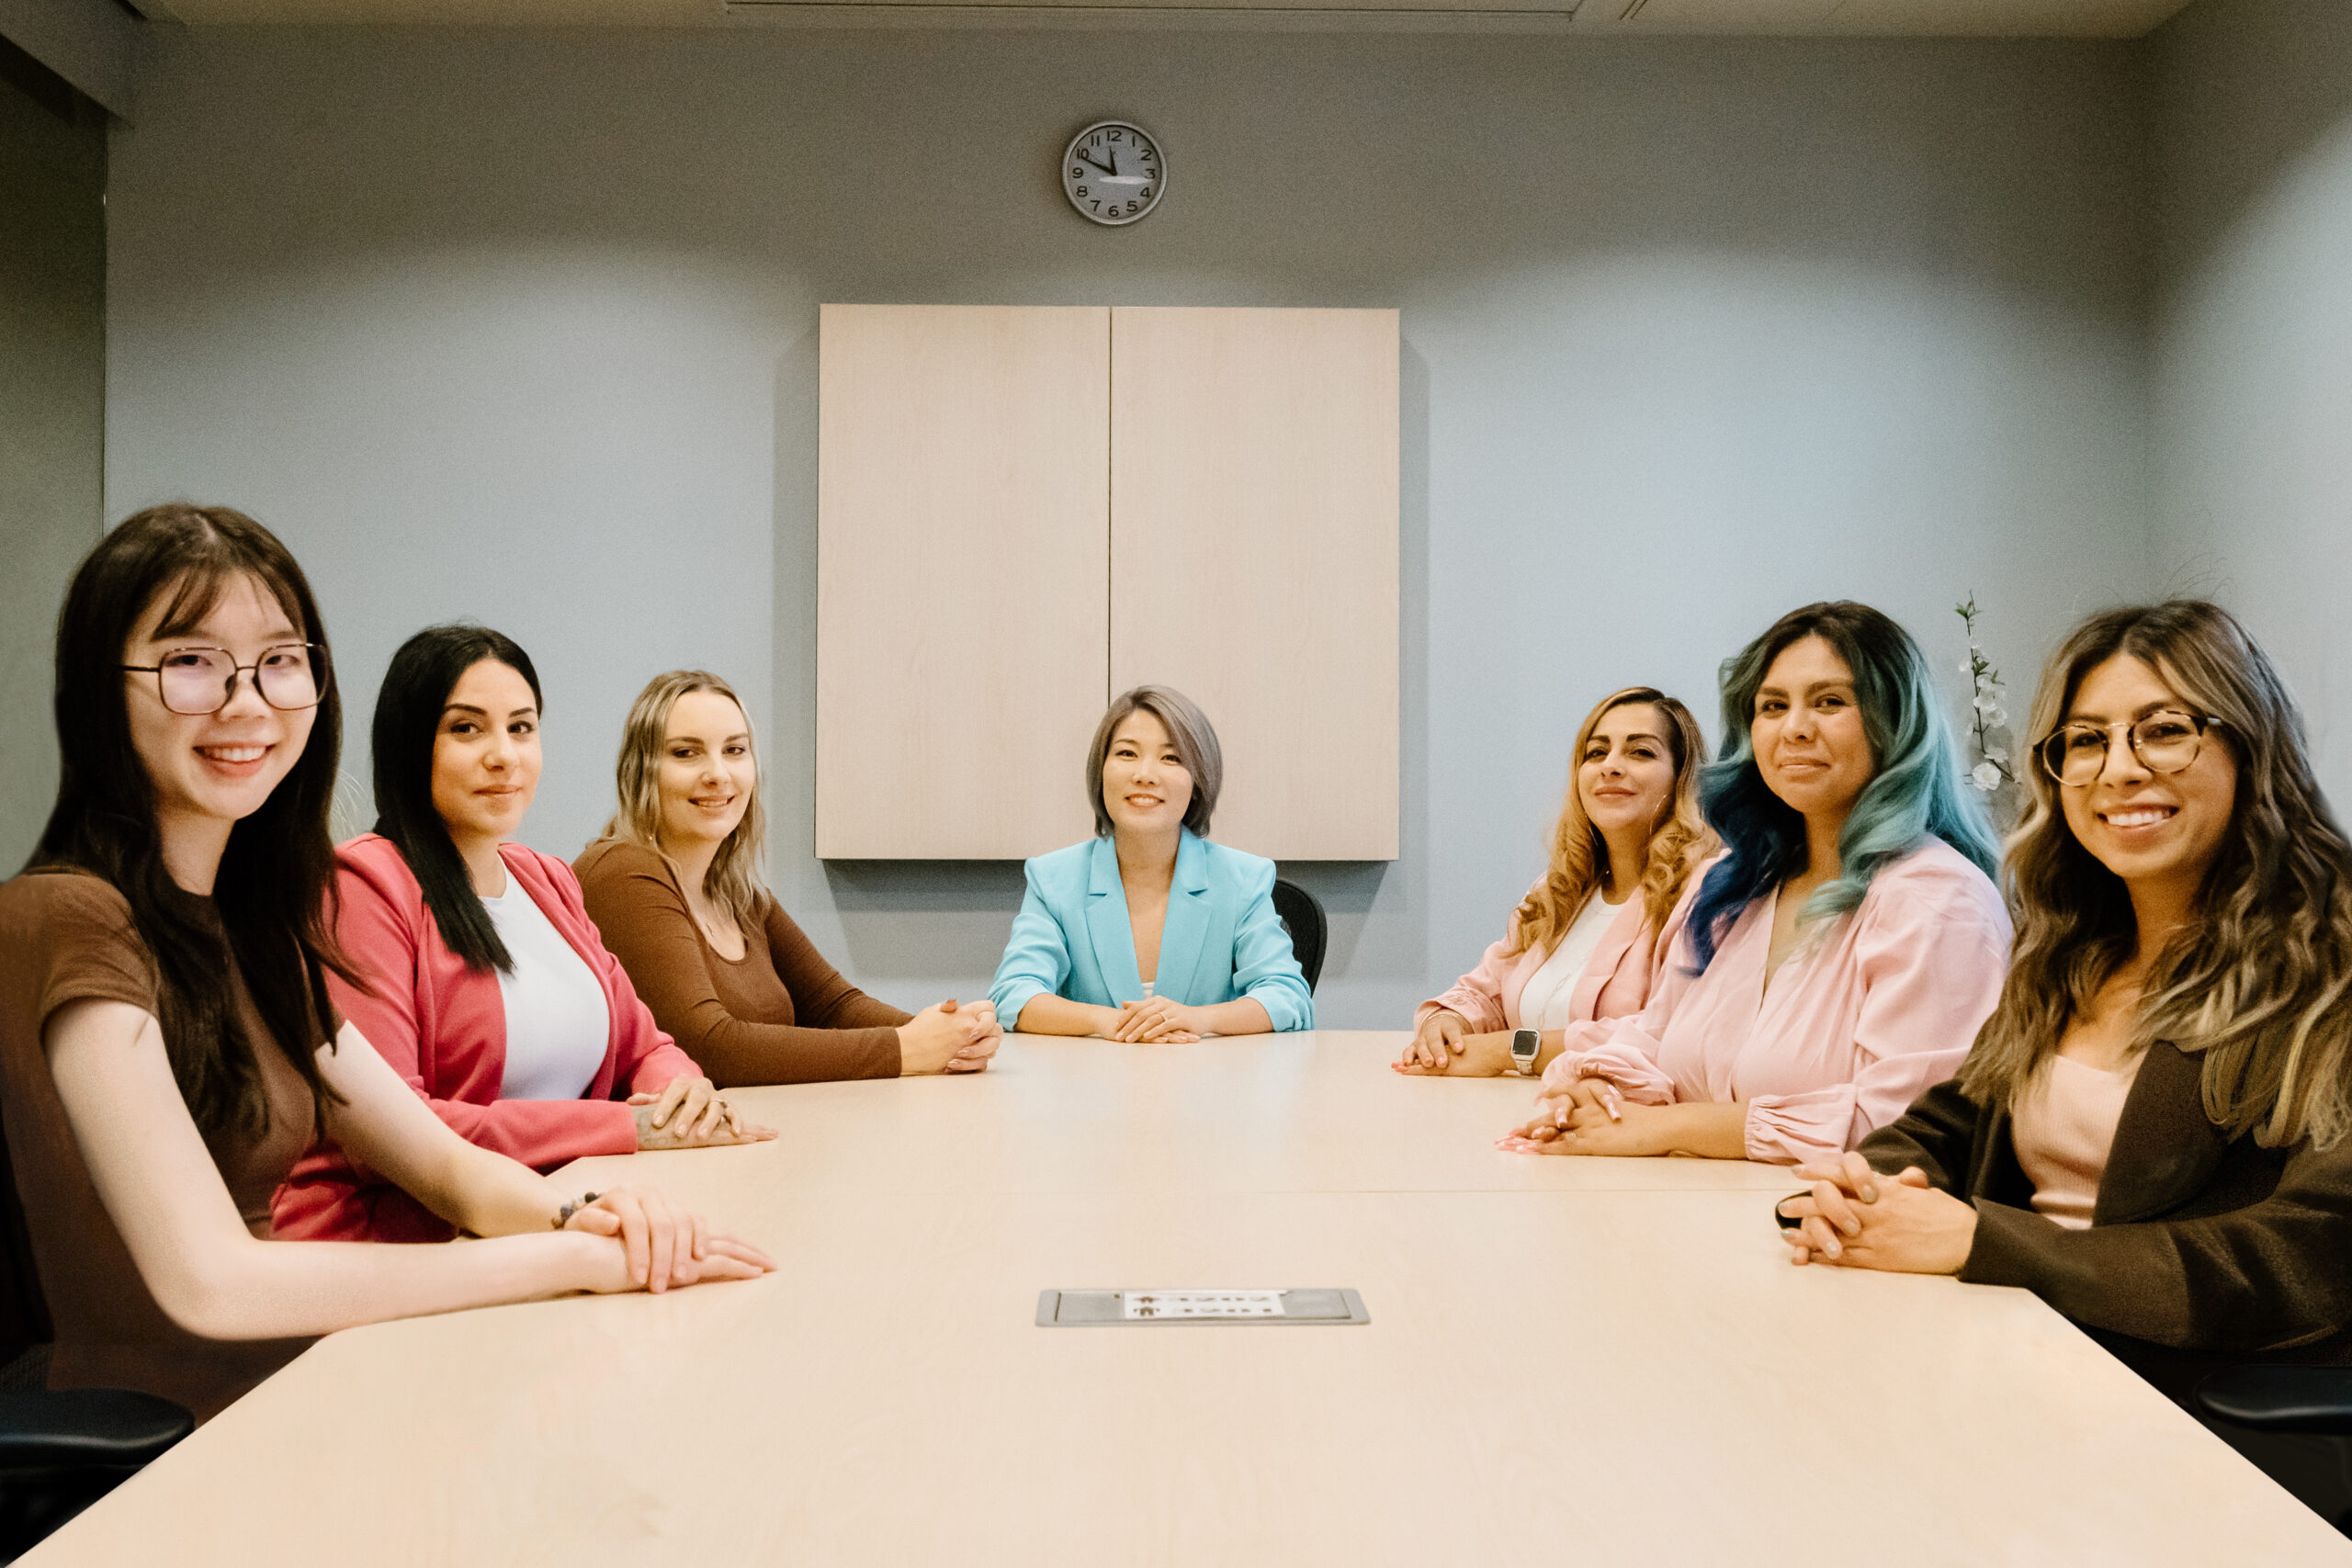 7 women sitting professionally at a table, smiling at the camera.